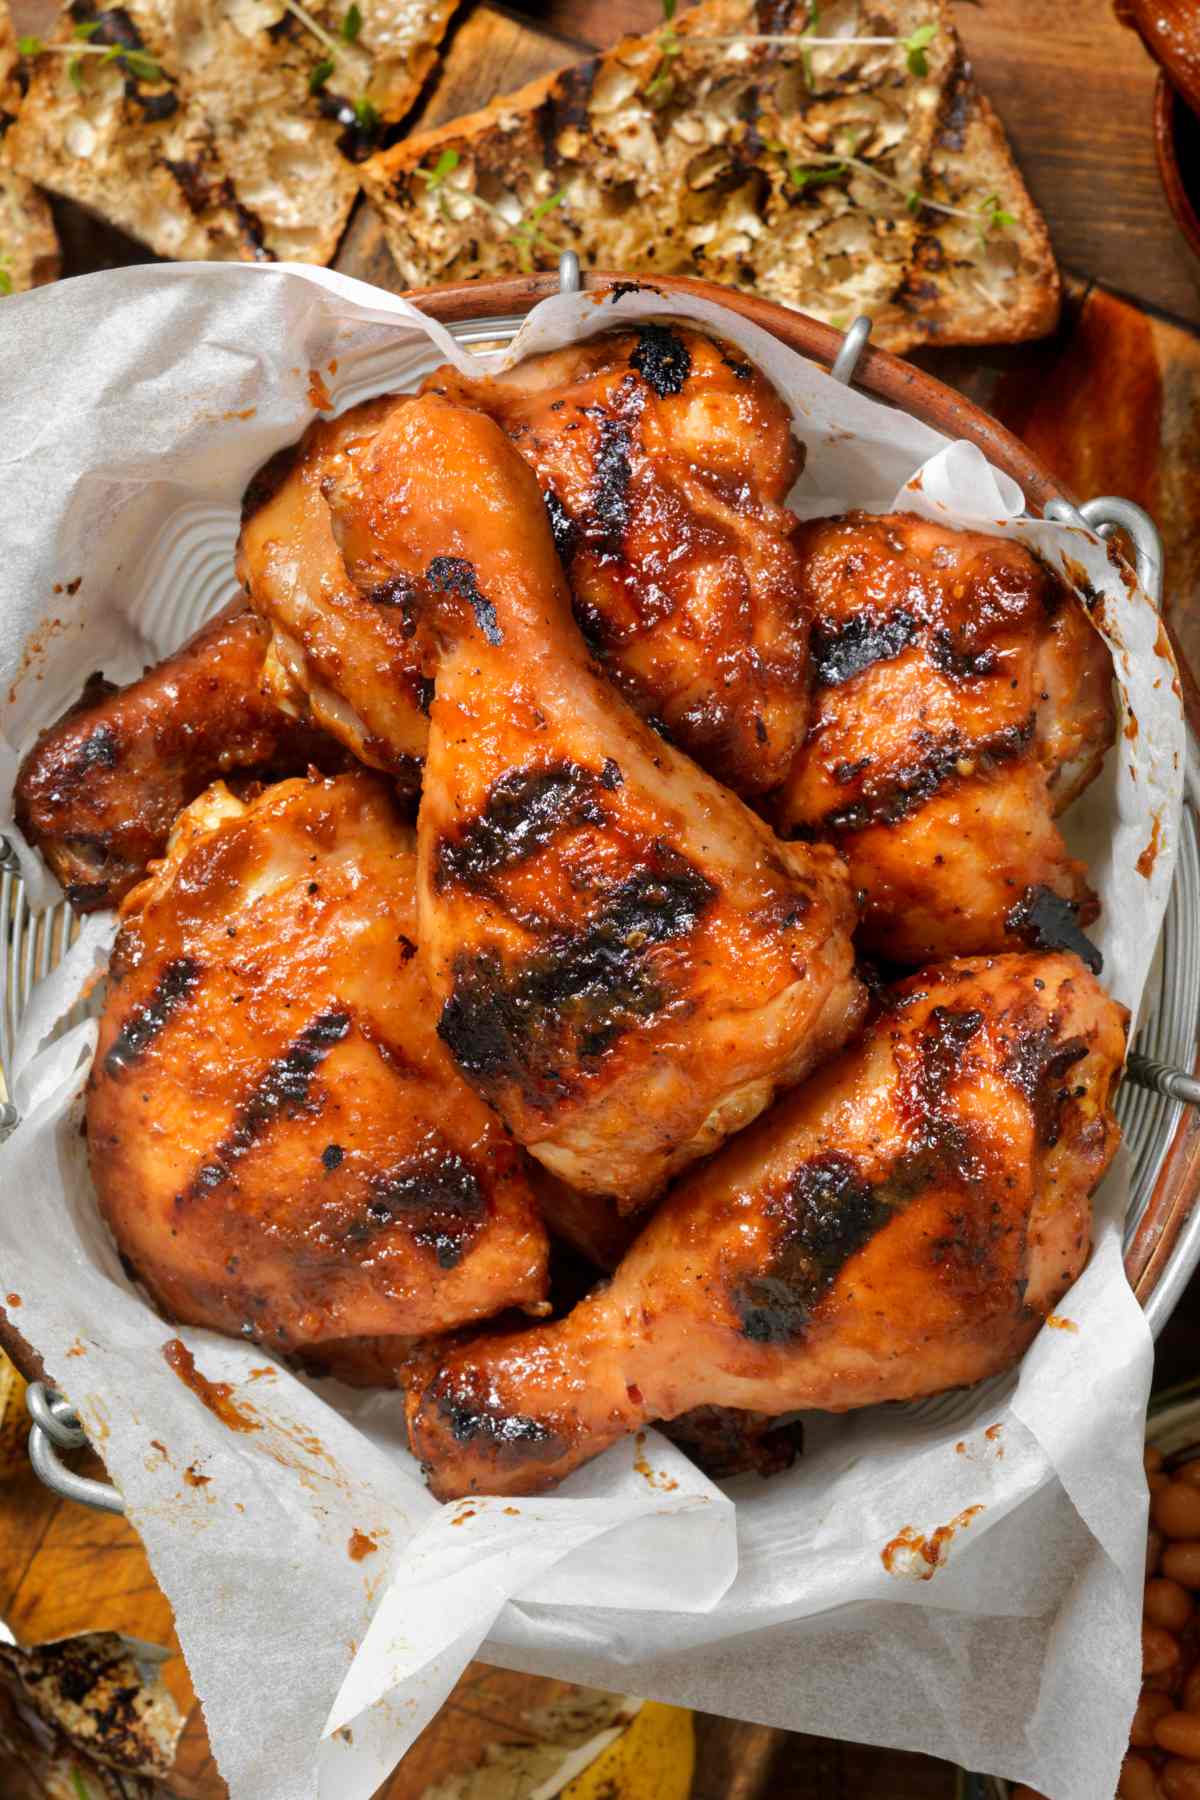 What’s the best temperature to grill chicken? Skip the trip to the grill house and follow these tips for making the tastiest grilled chicken at home!